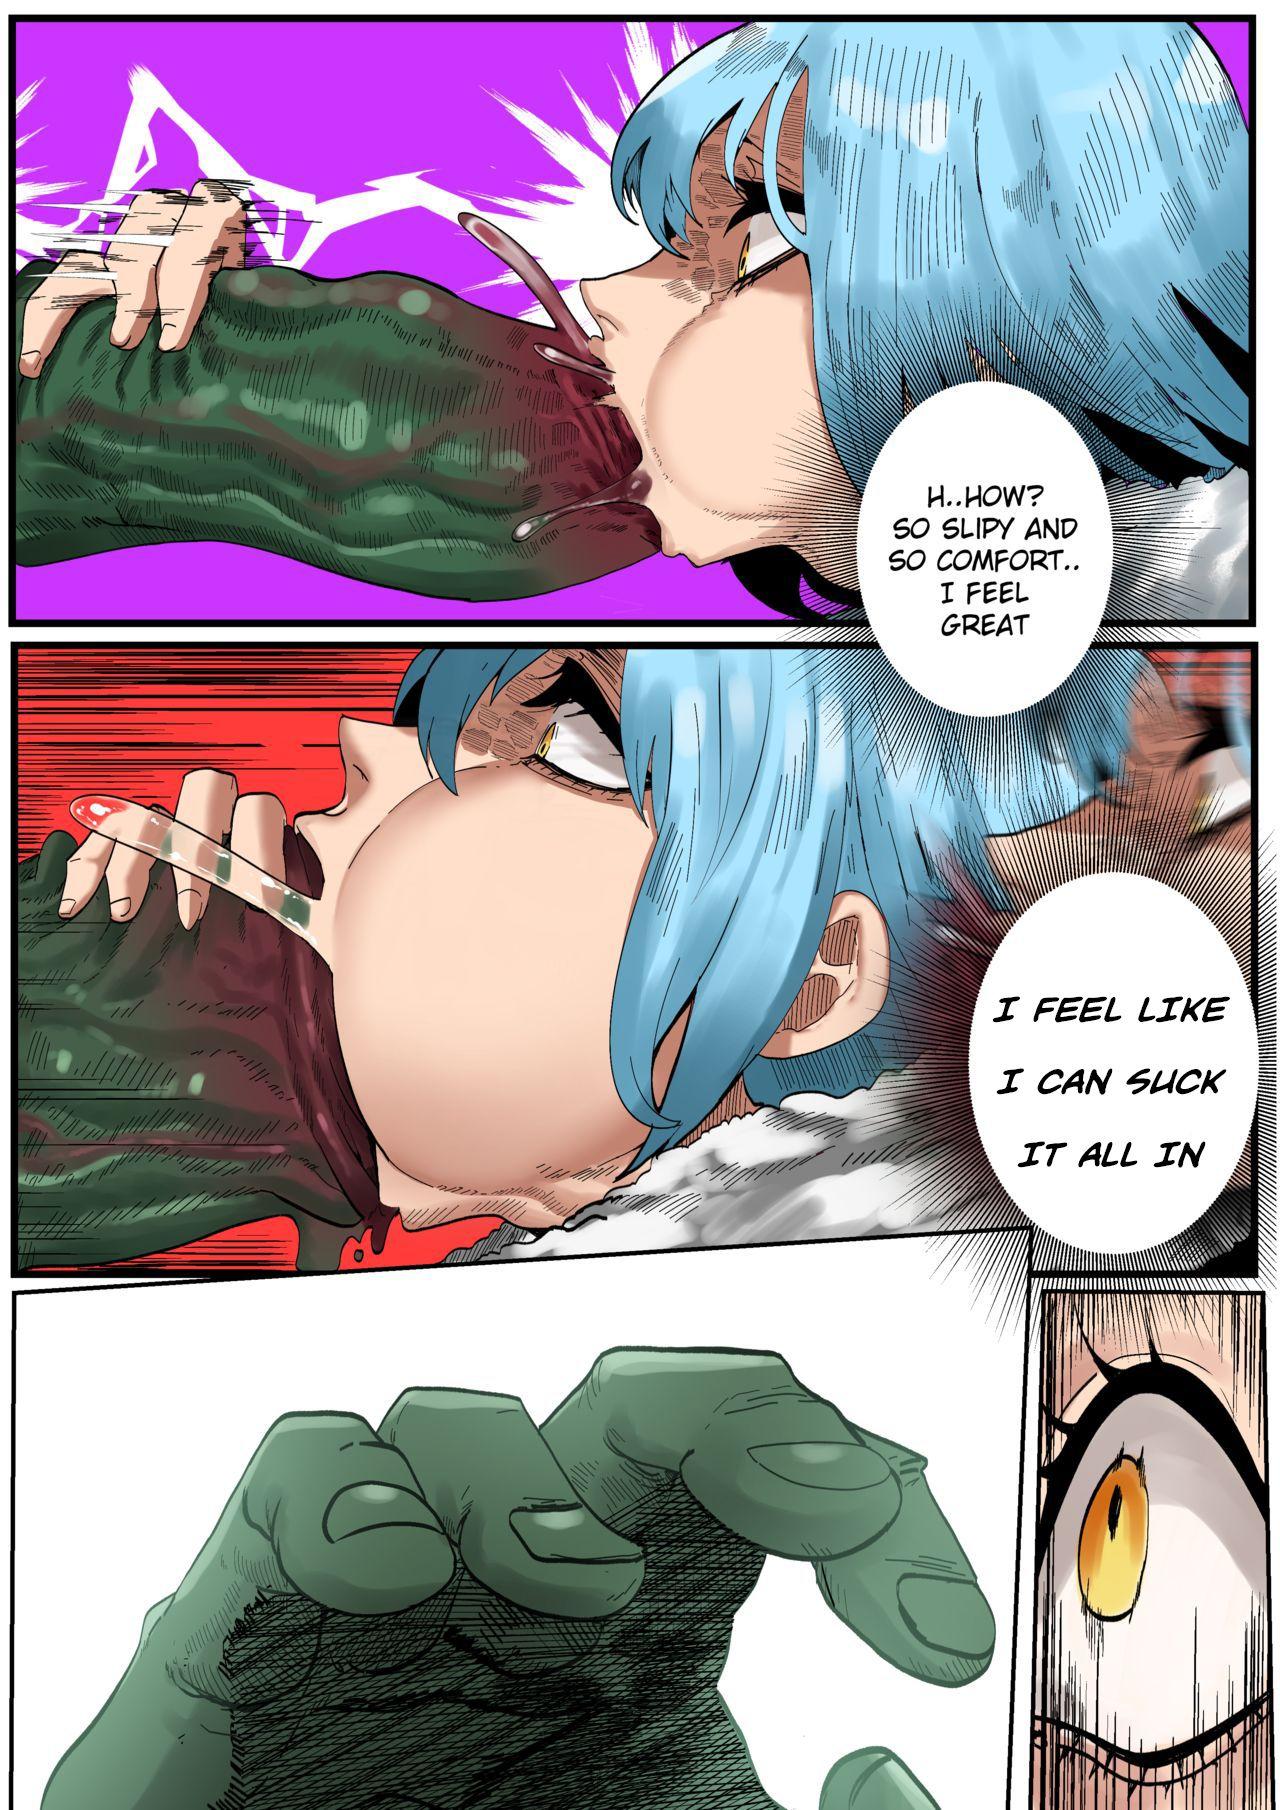 Hairy Pussy That Time I Got Reincarnated as a Bitchy Slime - Tensei shitara slime datta ken Onlyfans - Page 11